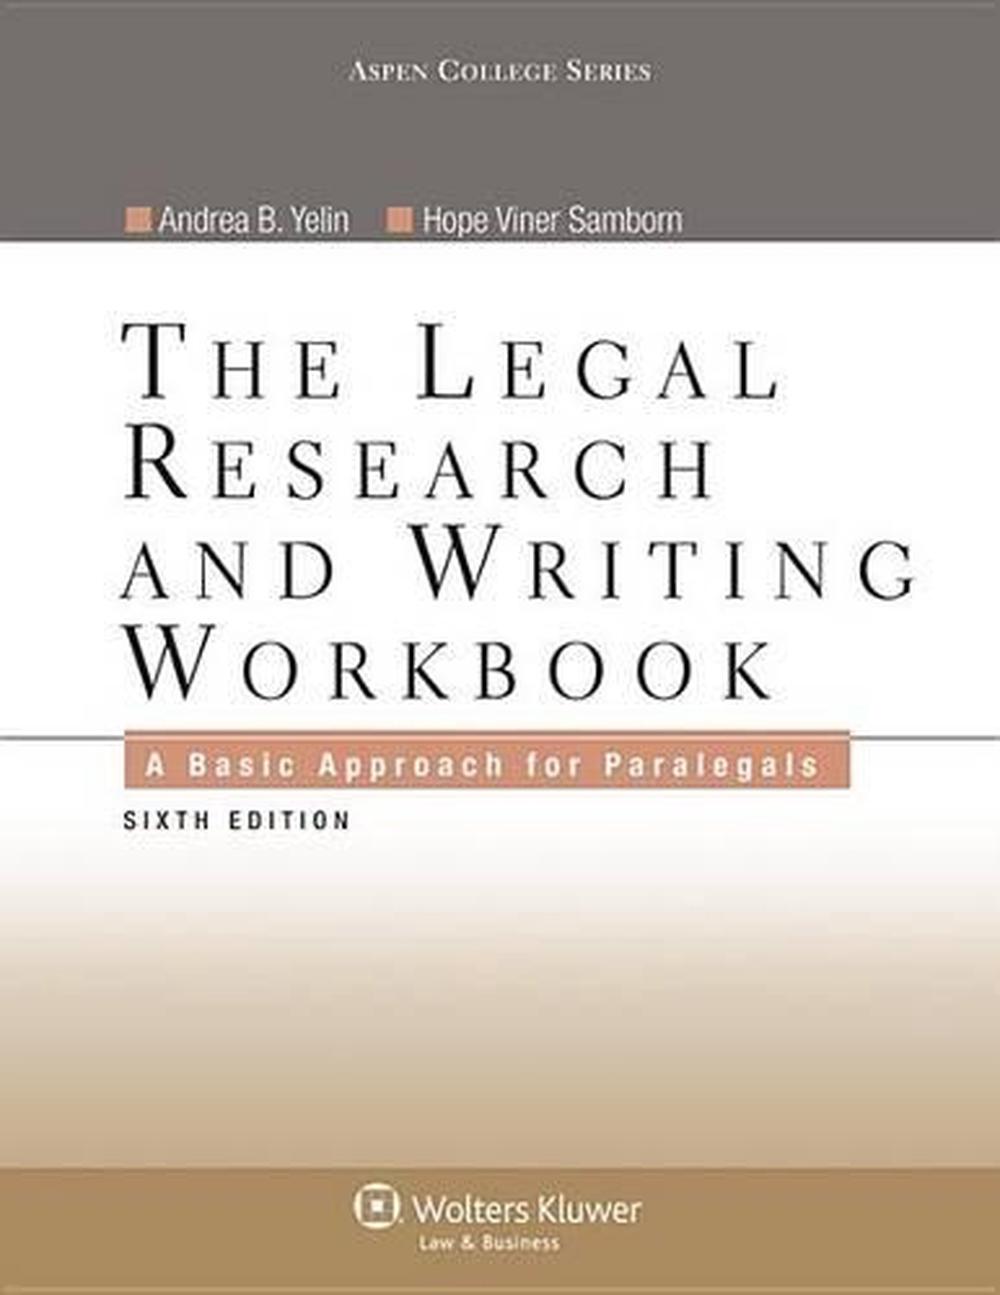 comprehensive guide to legal research writing and analysis